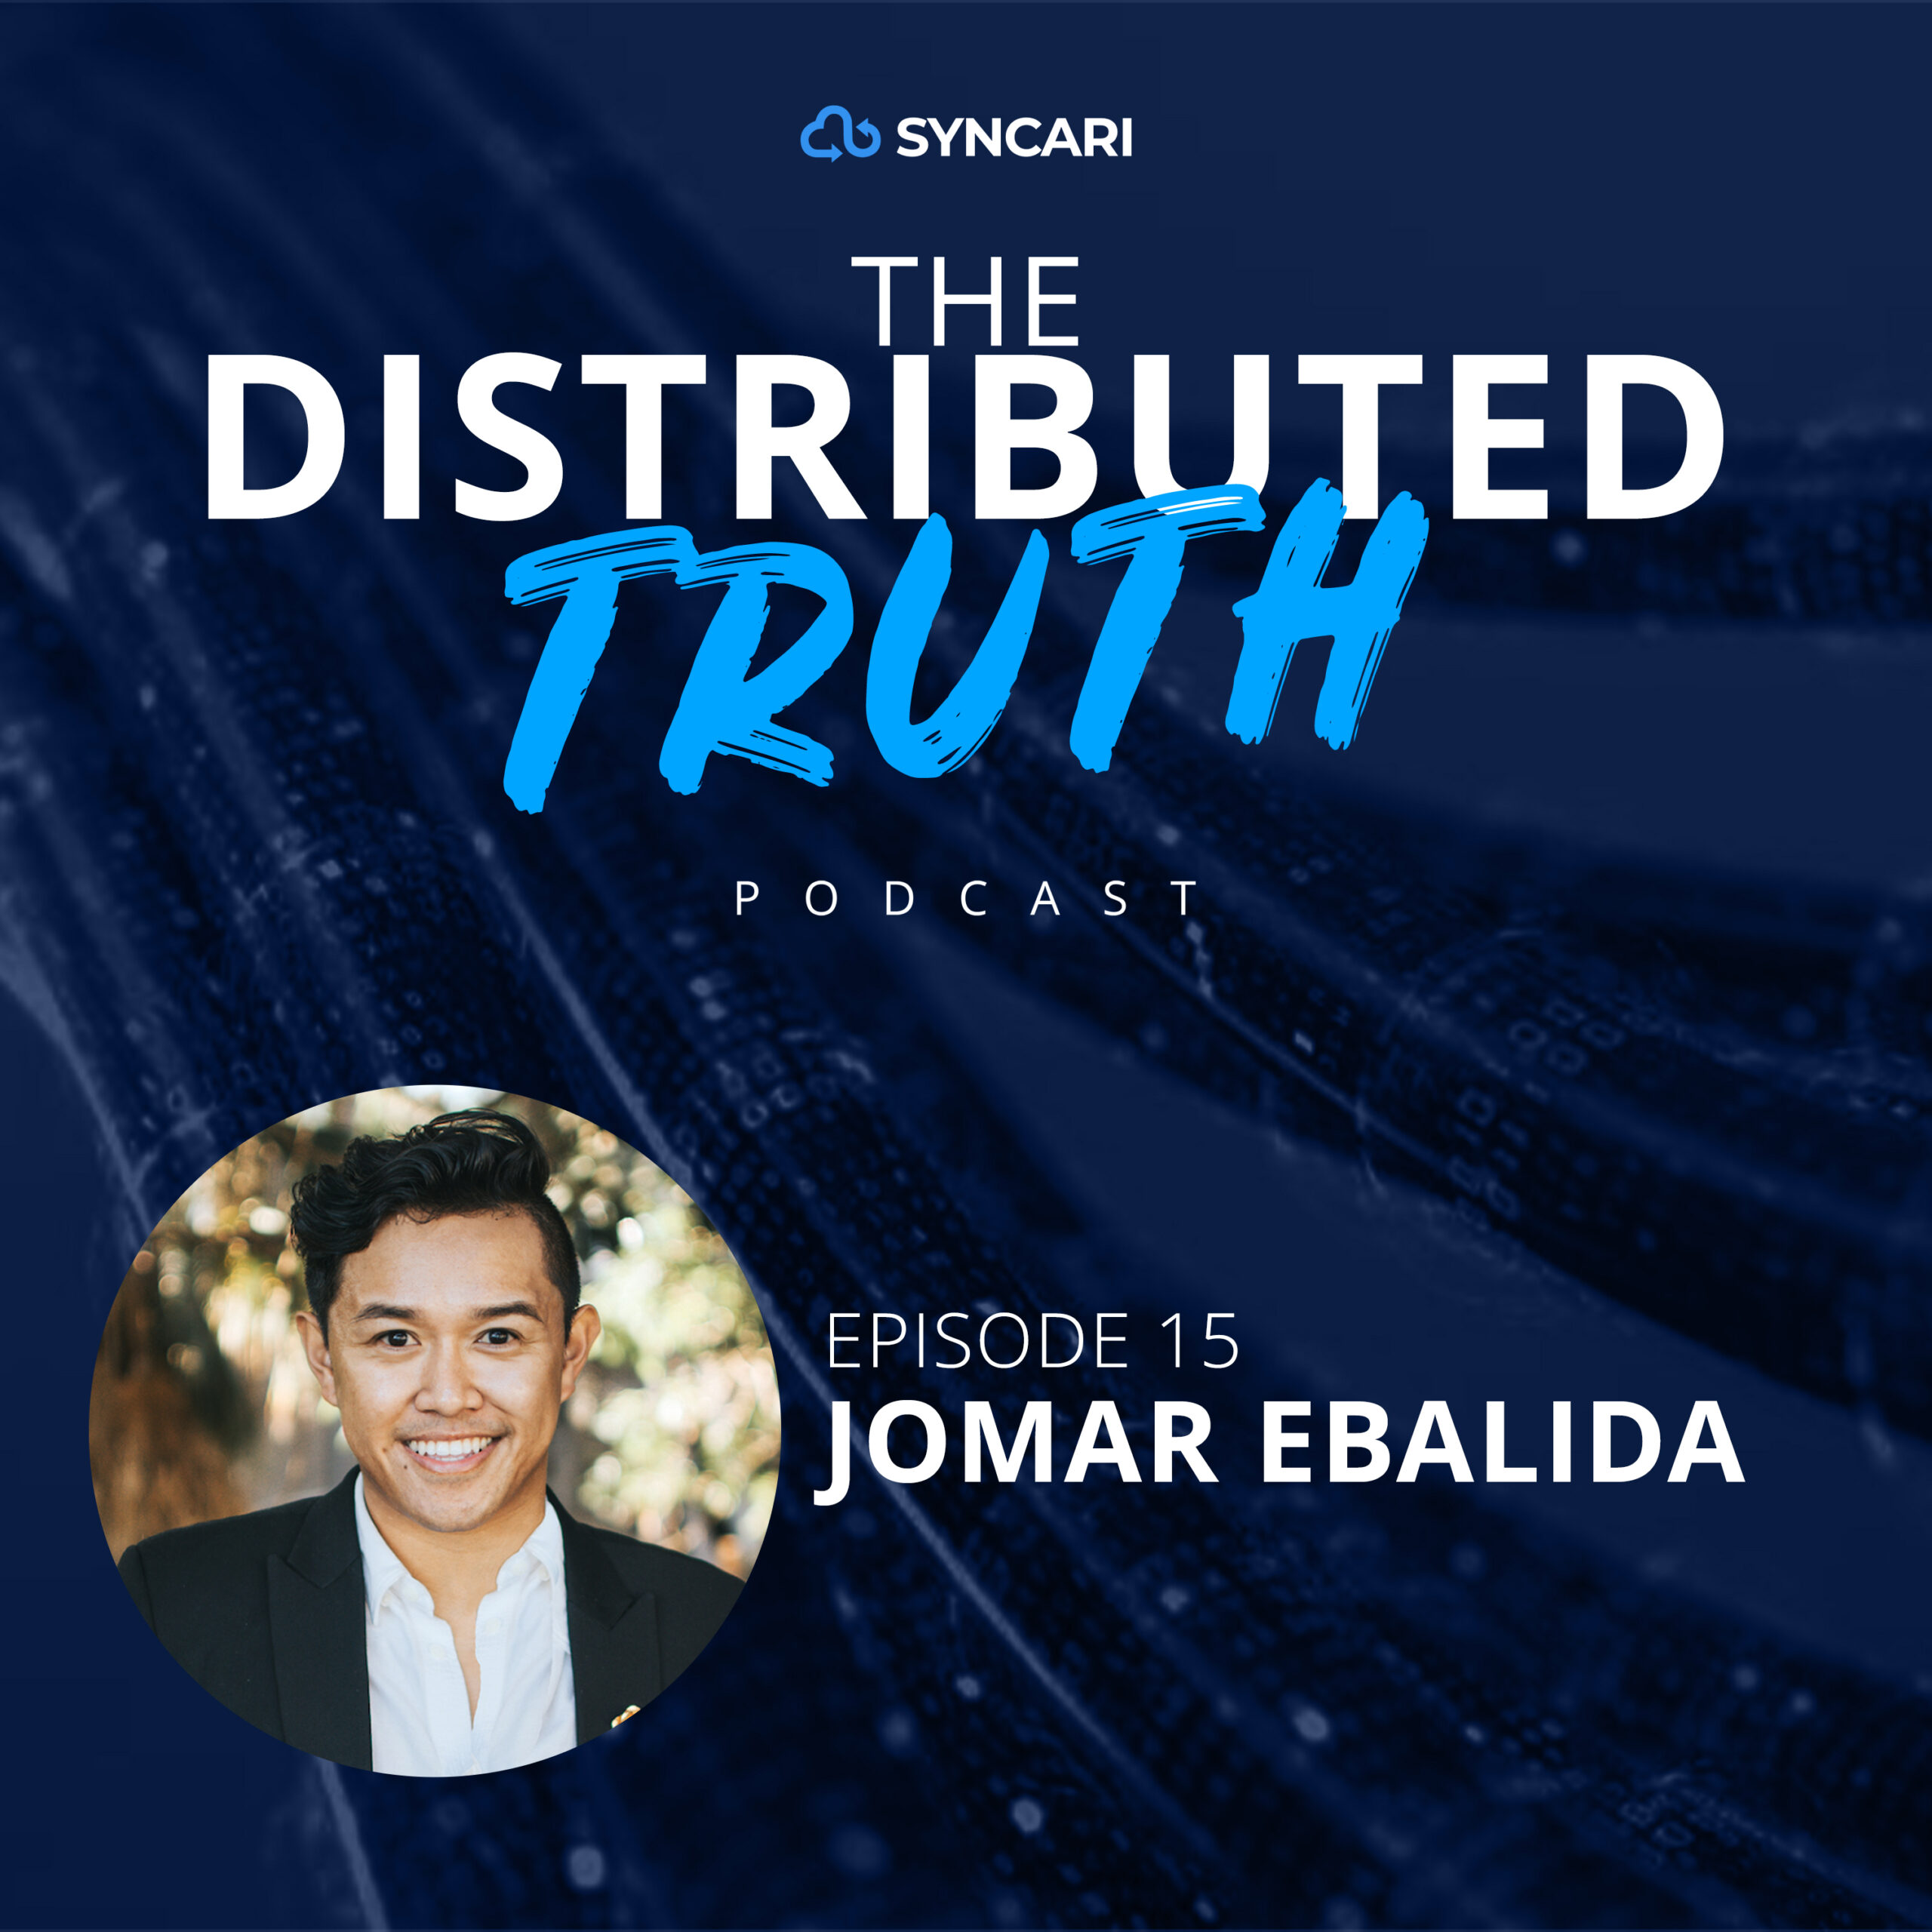 Firewalls & Funnels: Cybersecurity’s Lessons for RevOps, with Jomar Ebalida